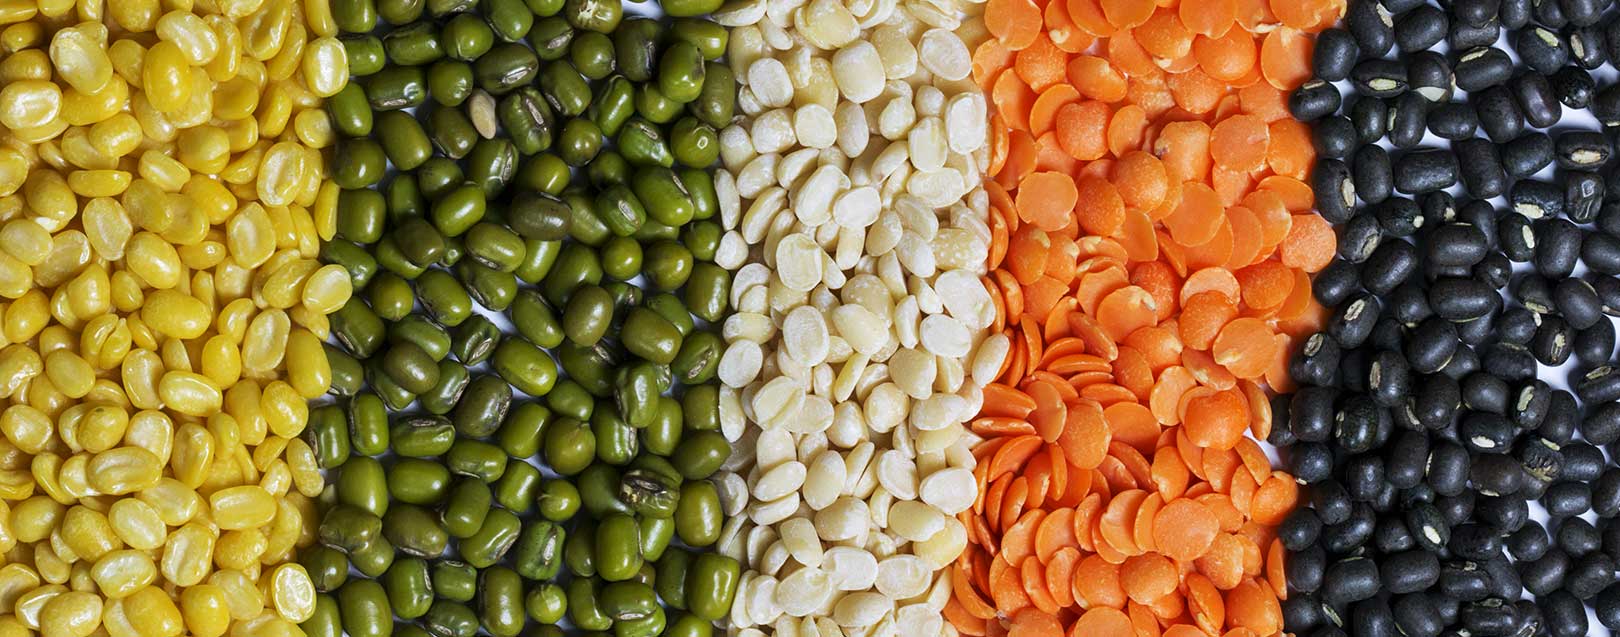 Govt. hikes MSP for pulses to boost production